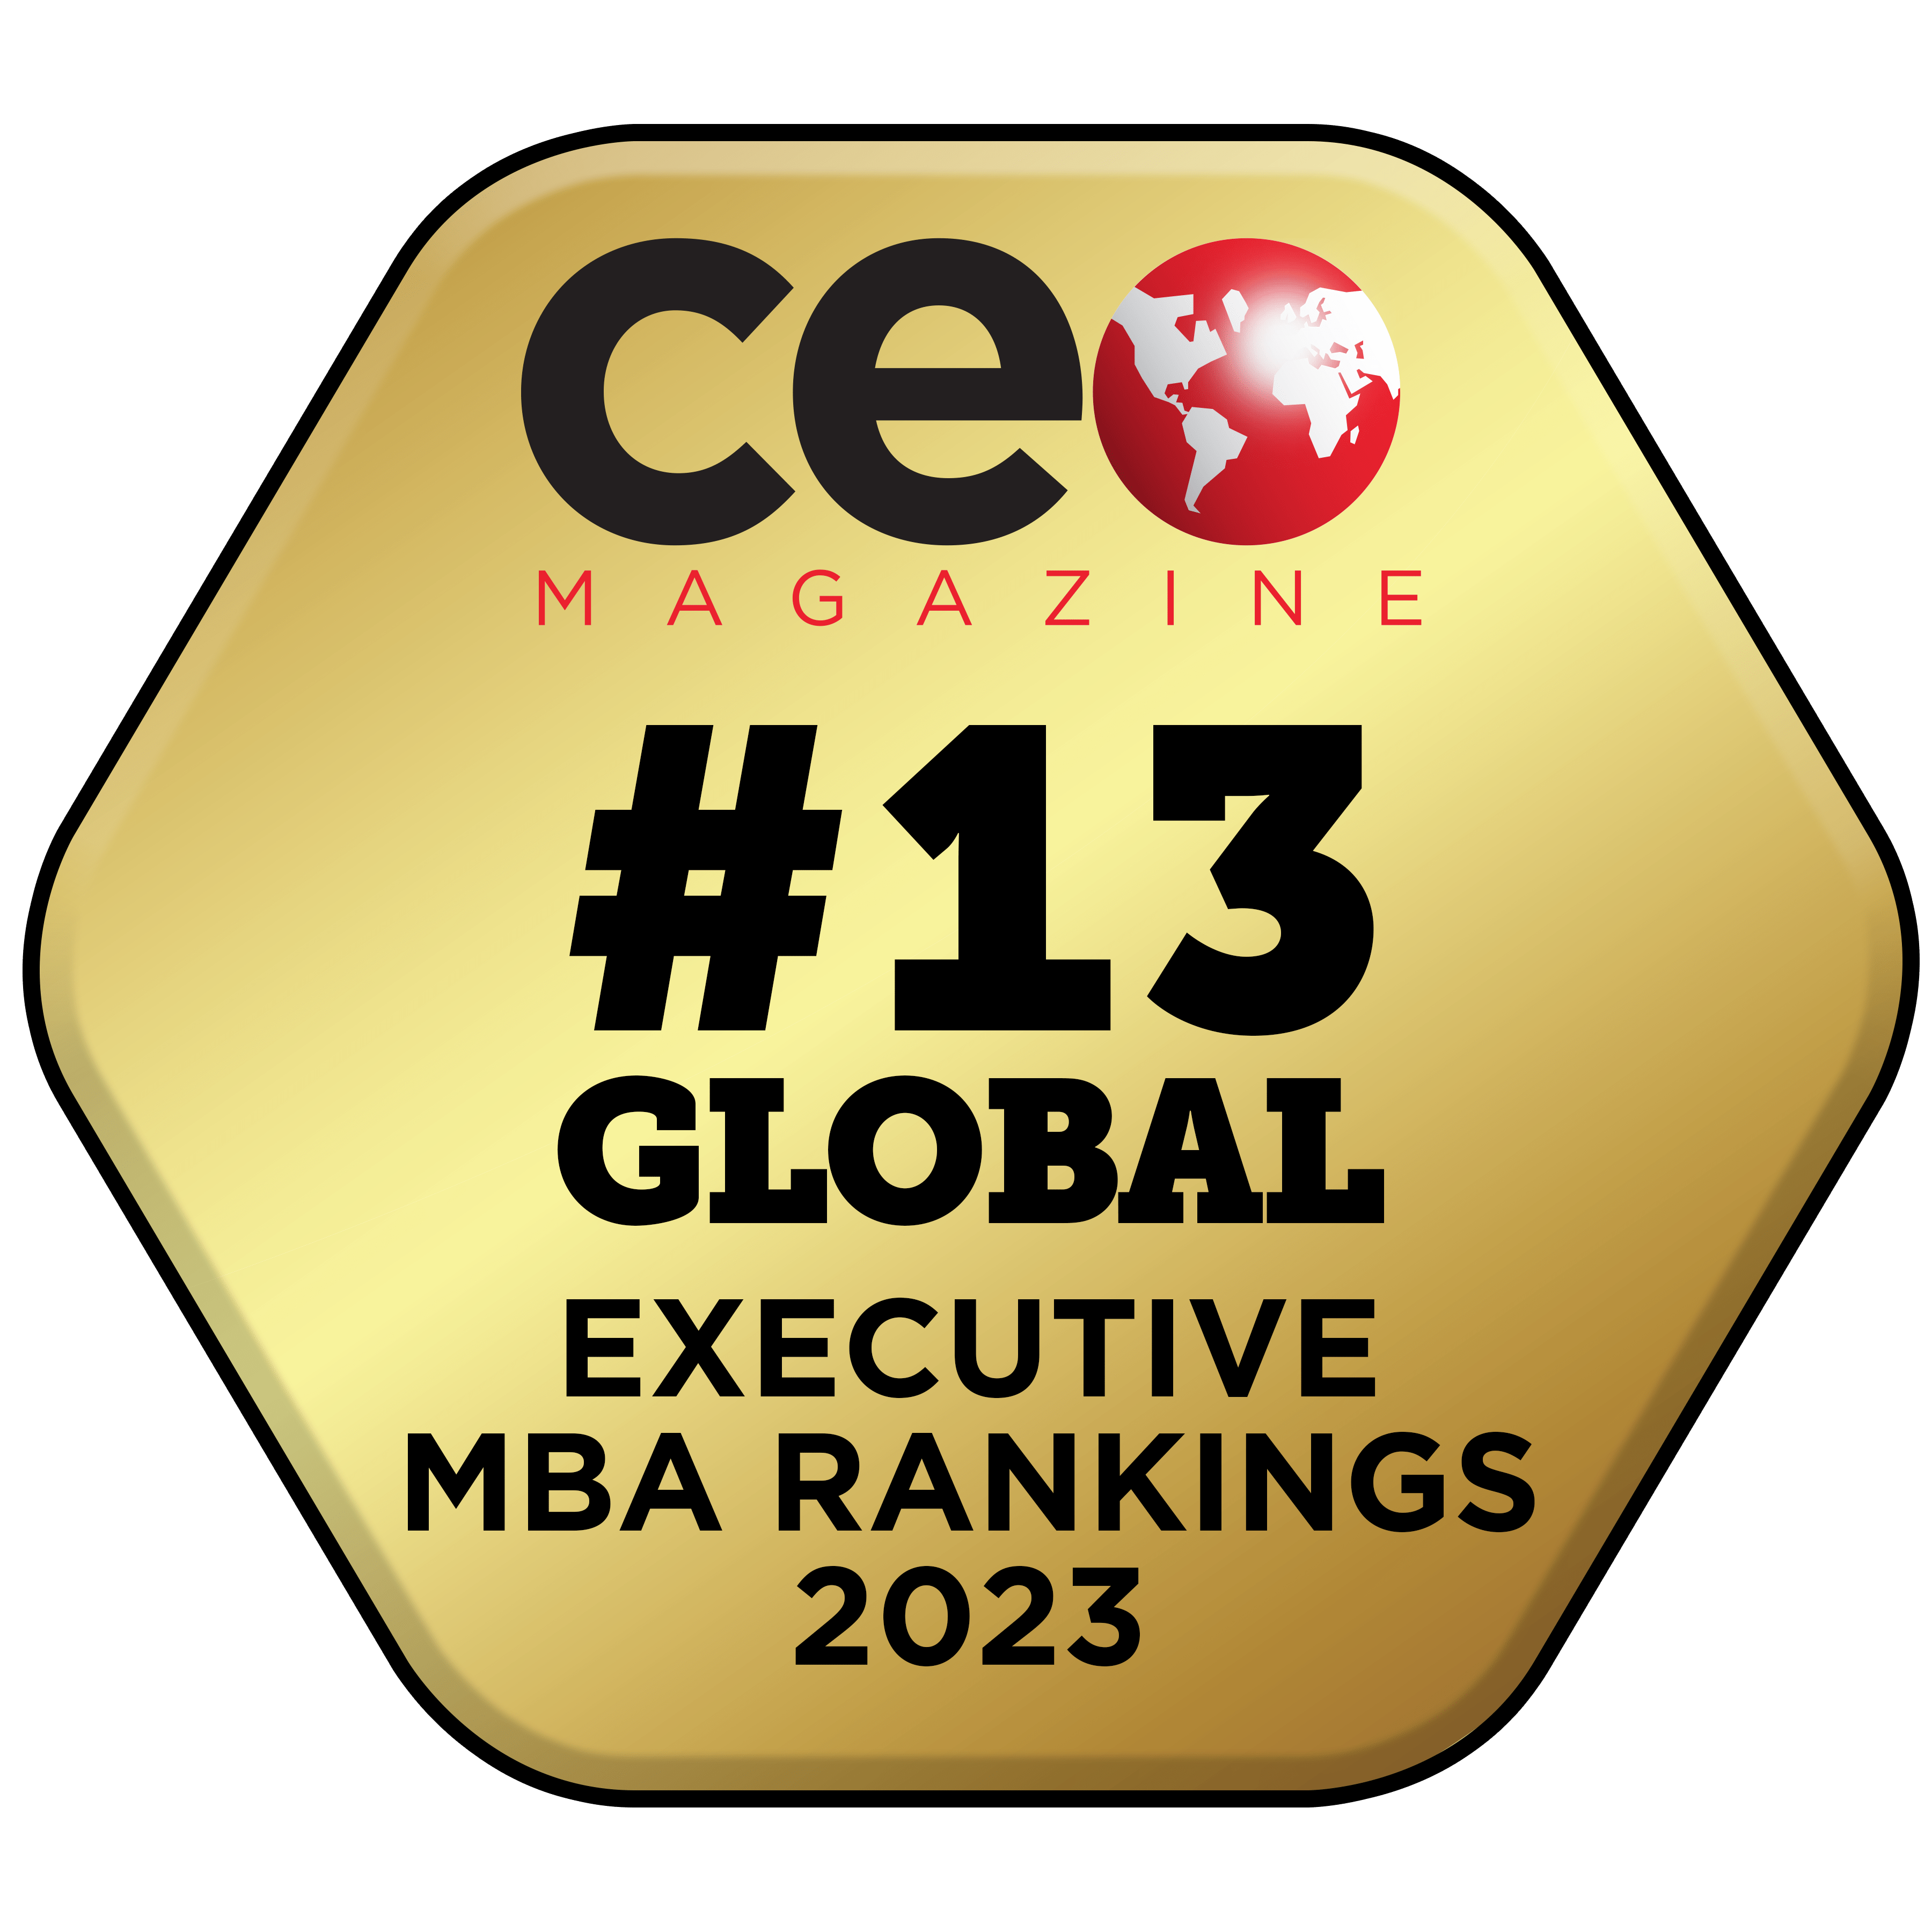 Rankings badge from CEO Magazine #13 Global EMBA in 2023